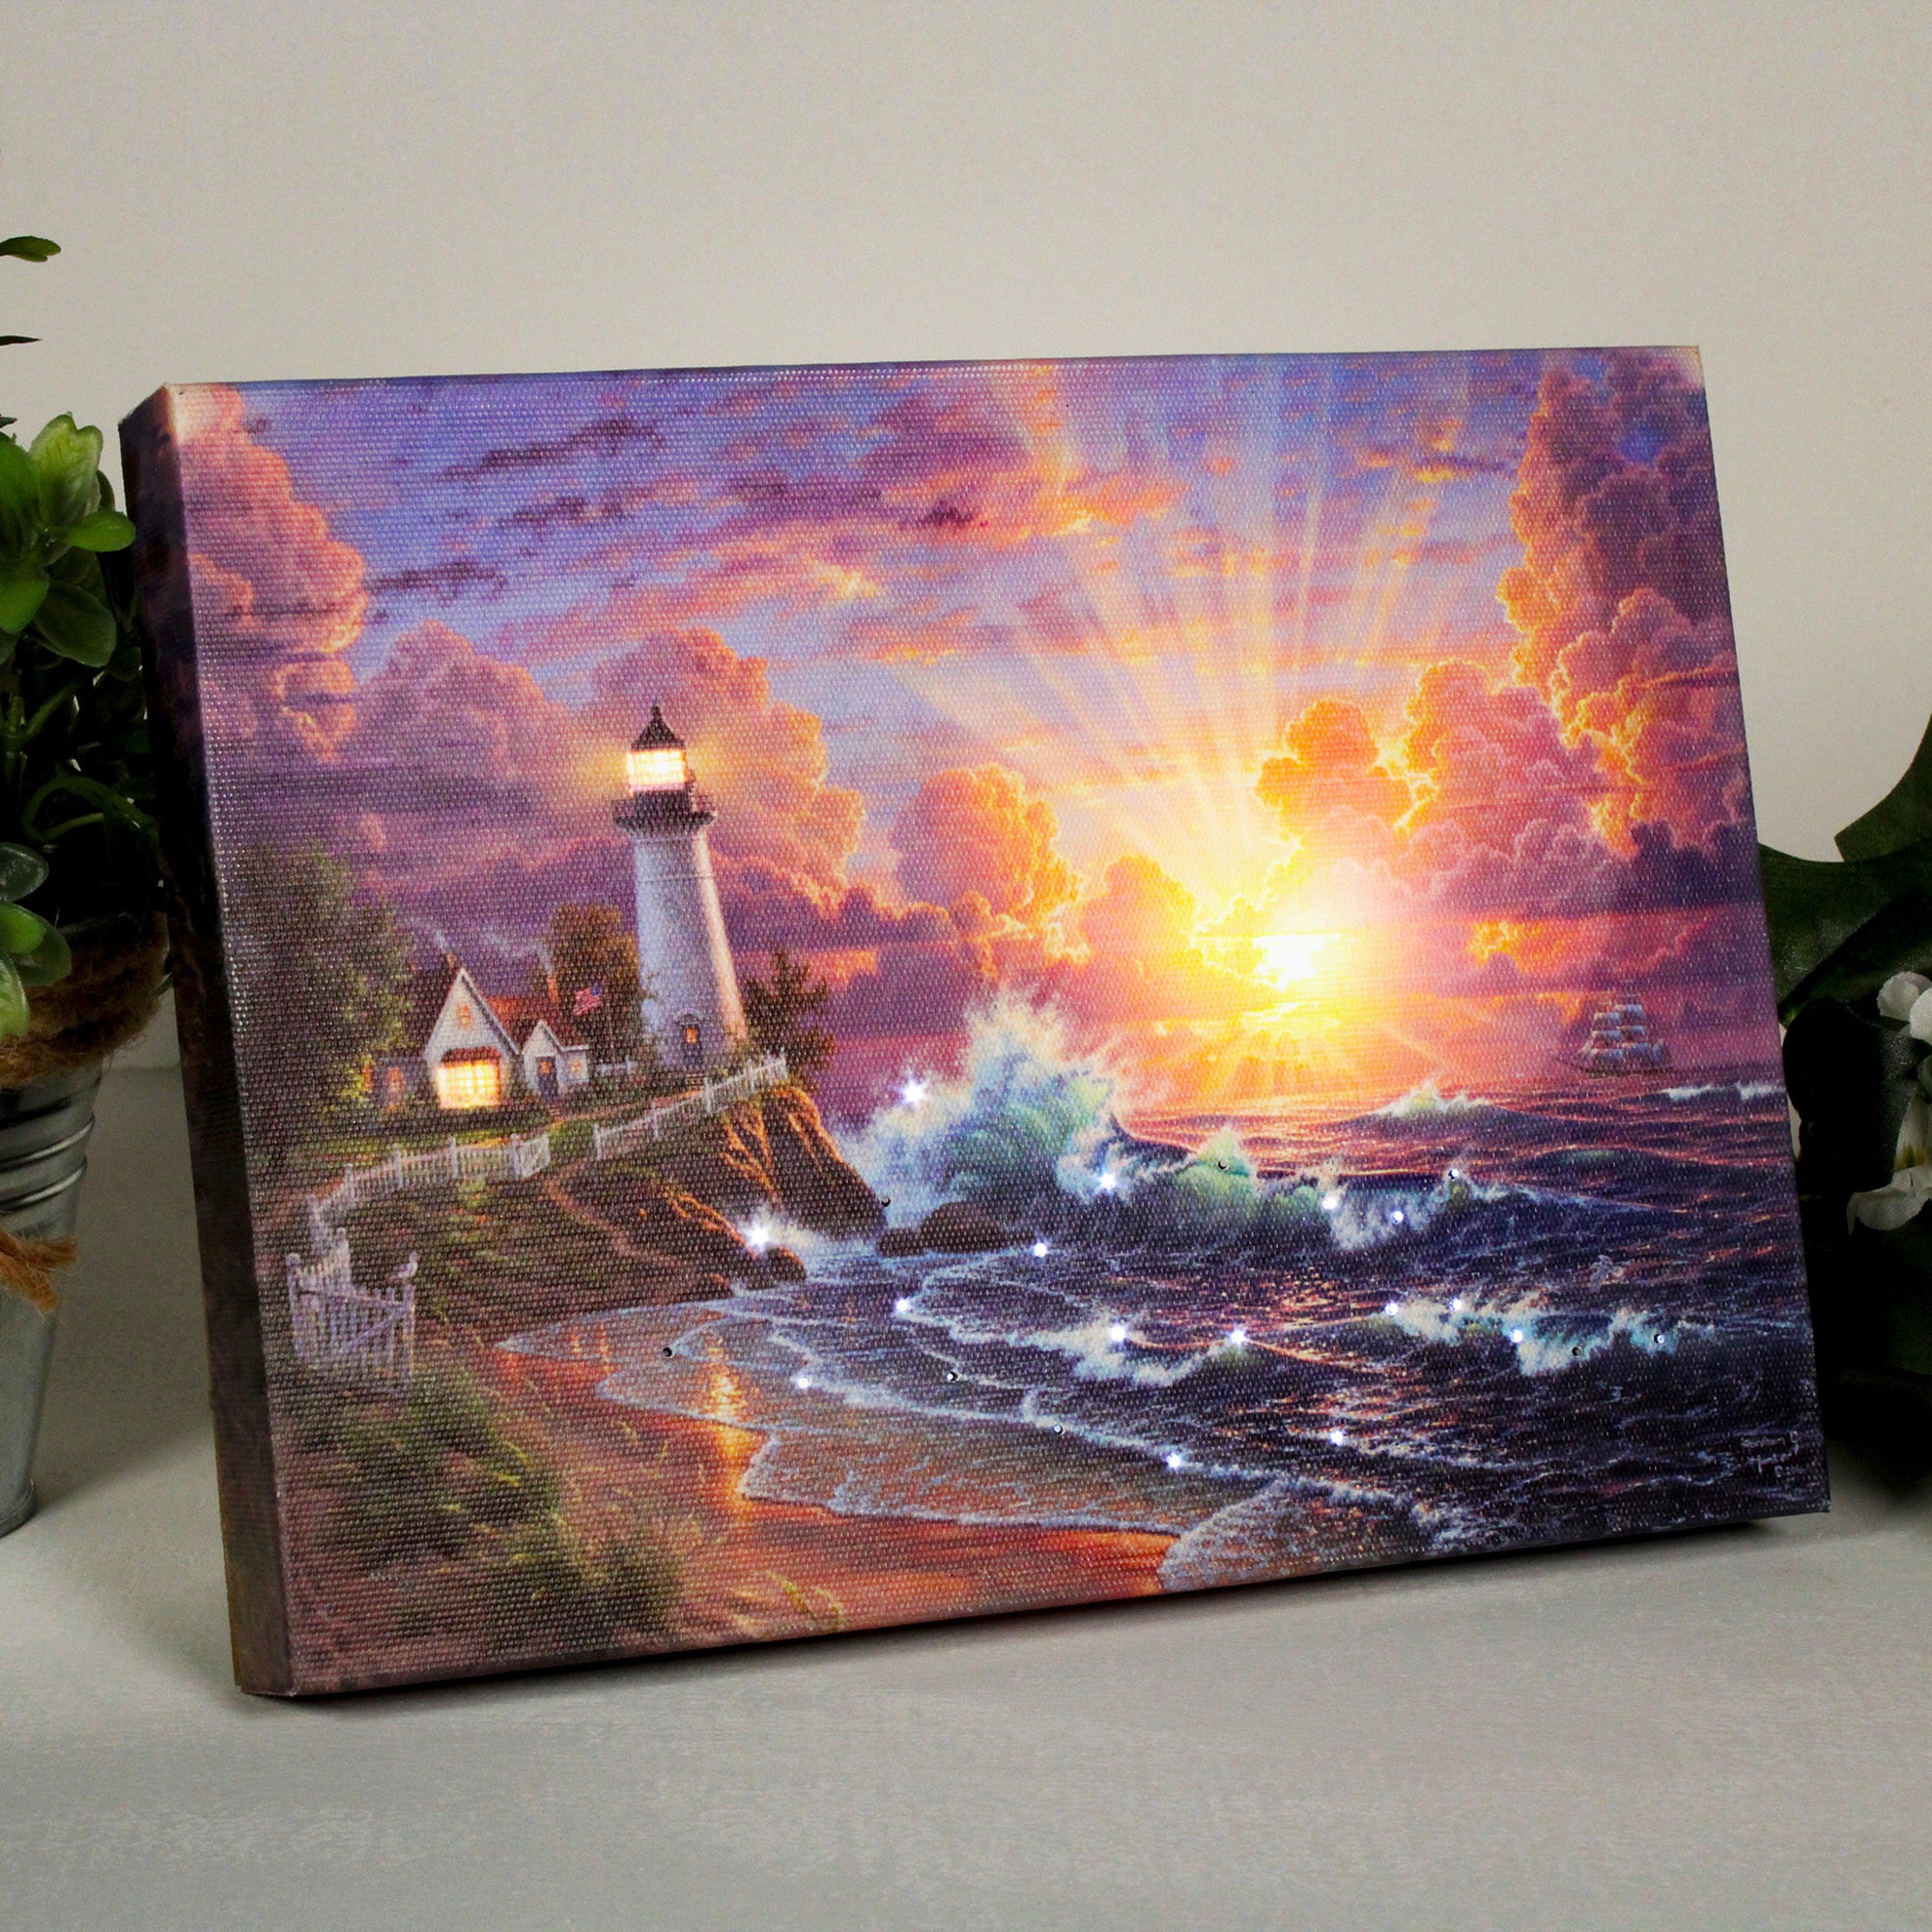 Light of Hope 8x6 Lighted Tabletop Canvas